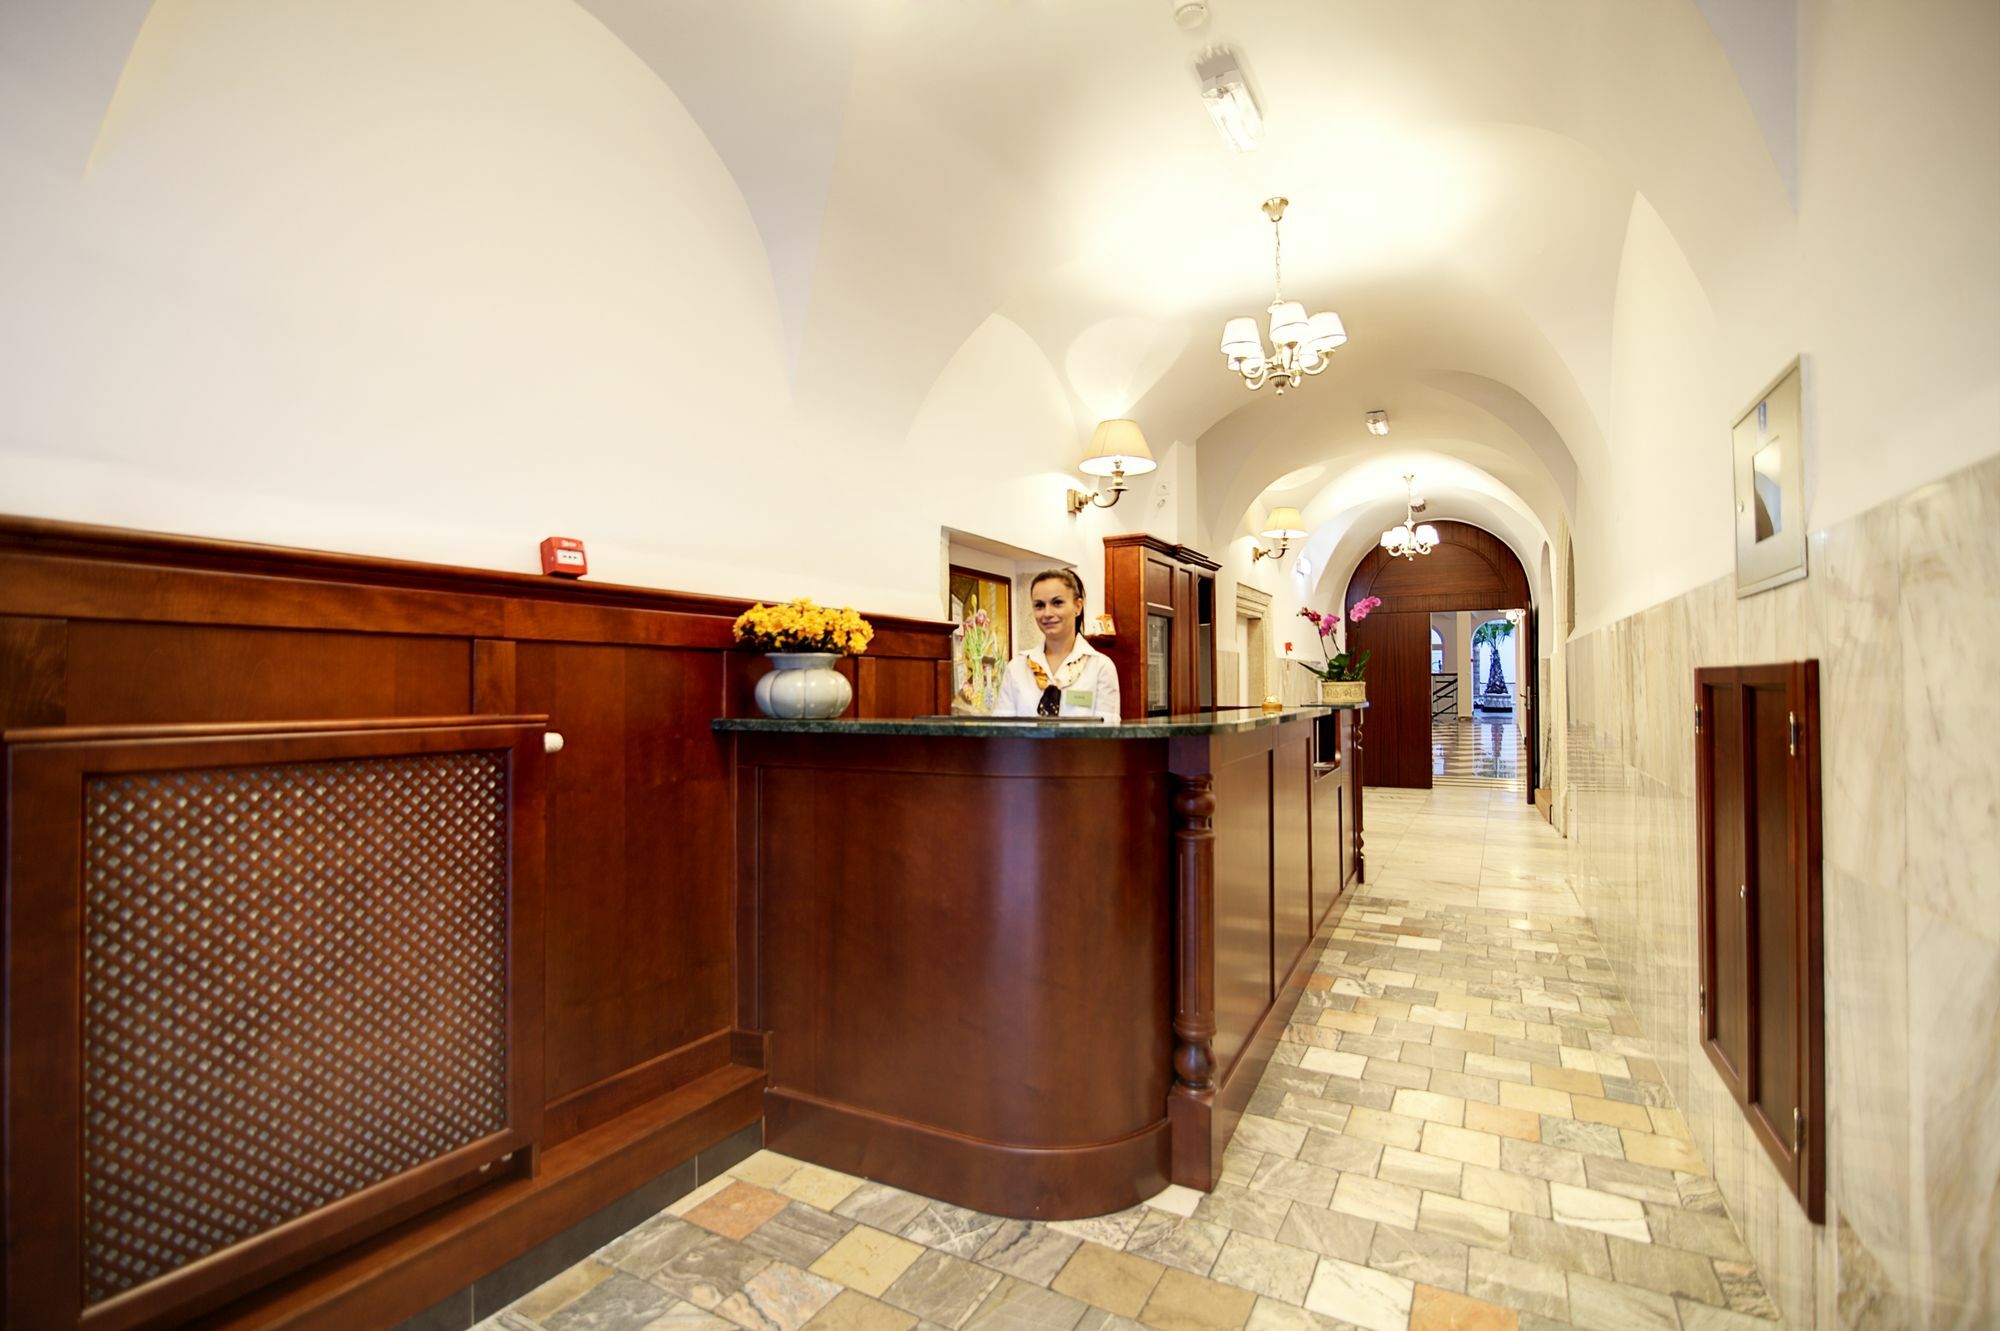 Hotel 32 Krakow Old Town Екстер'єр фото